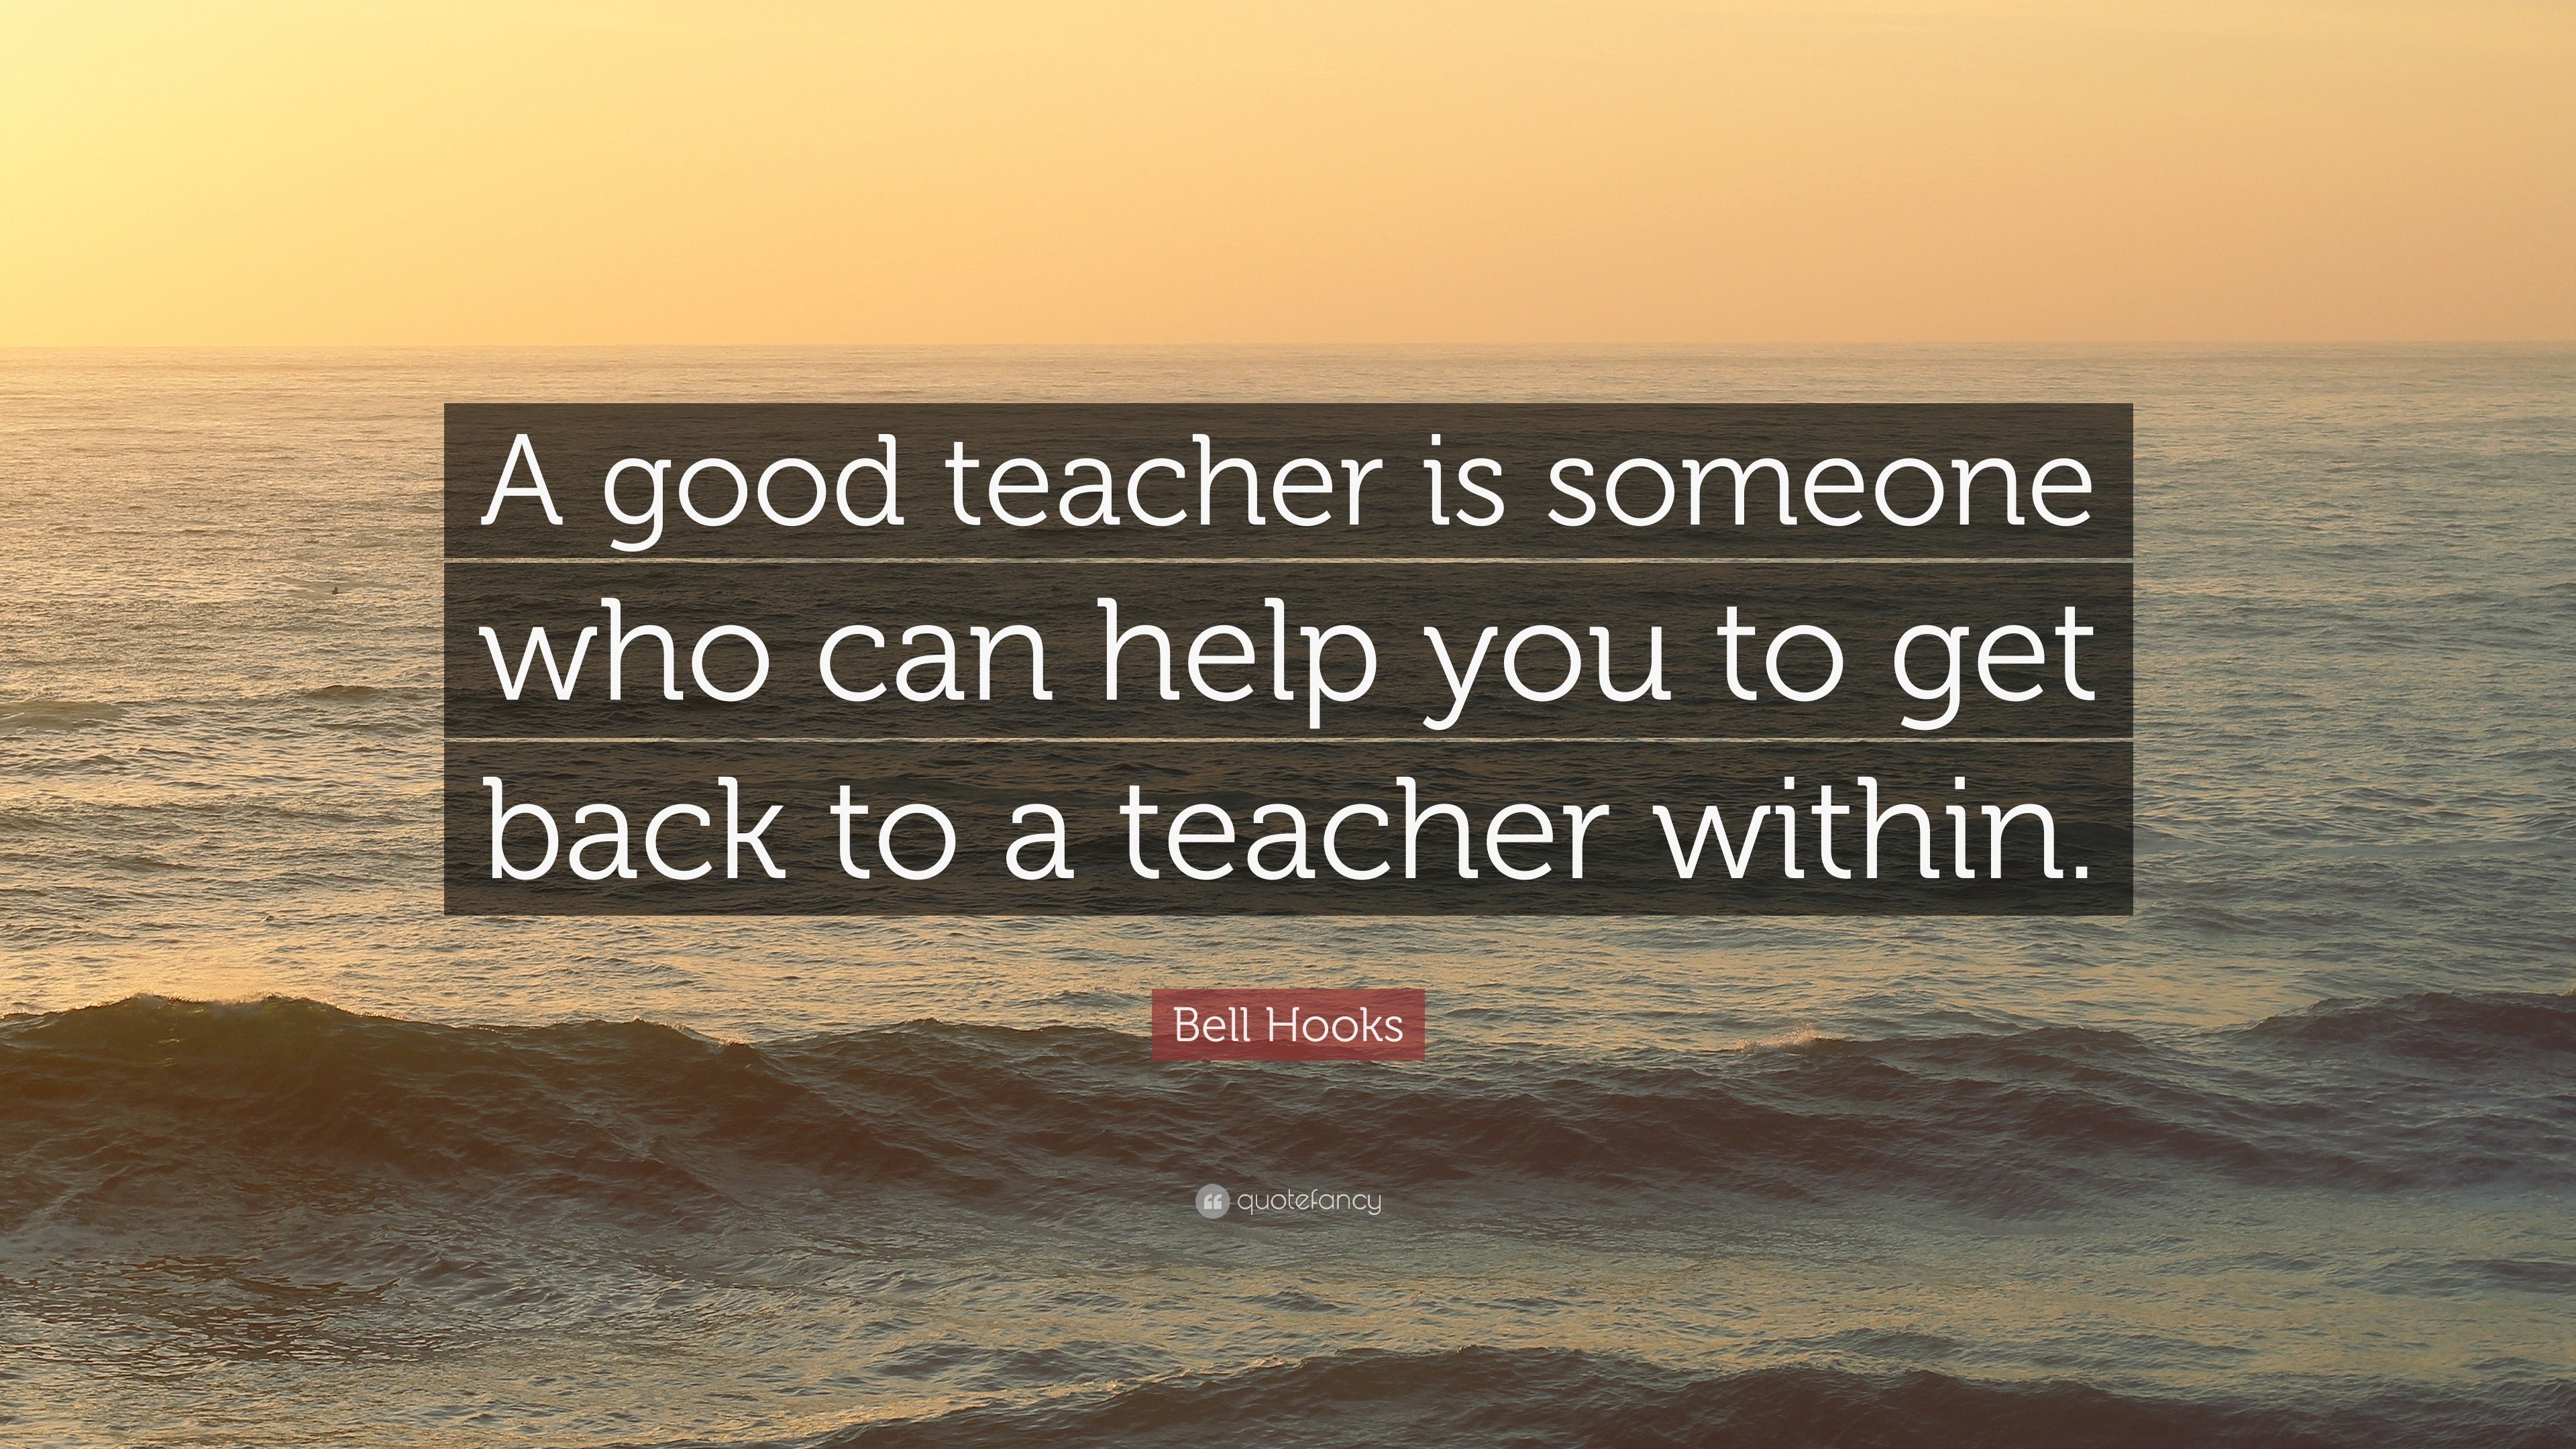 Bell Hooks Quote: “A good teacher is someone who can help you to get